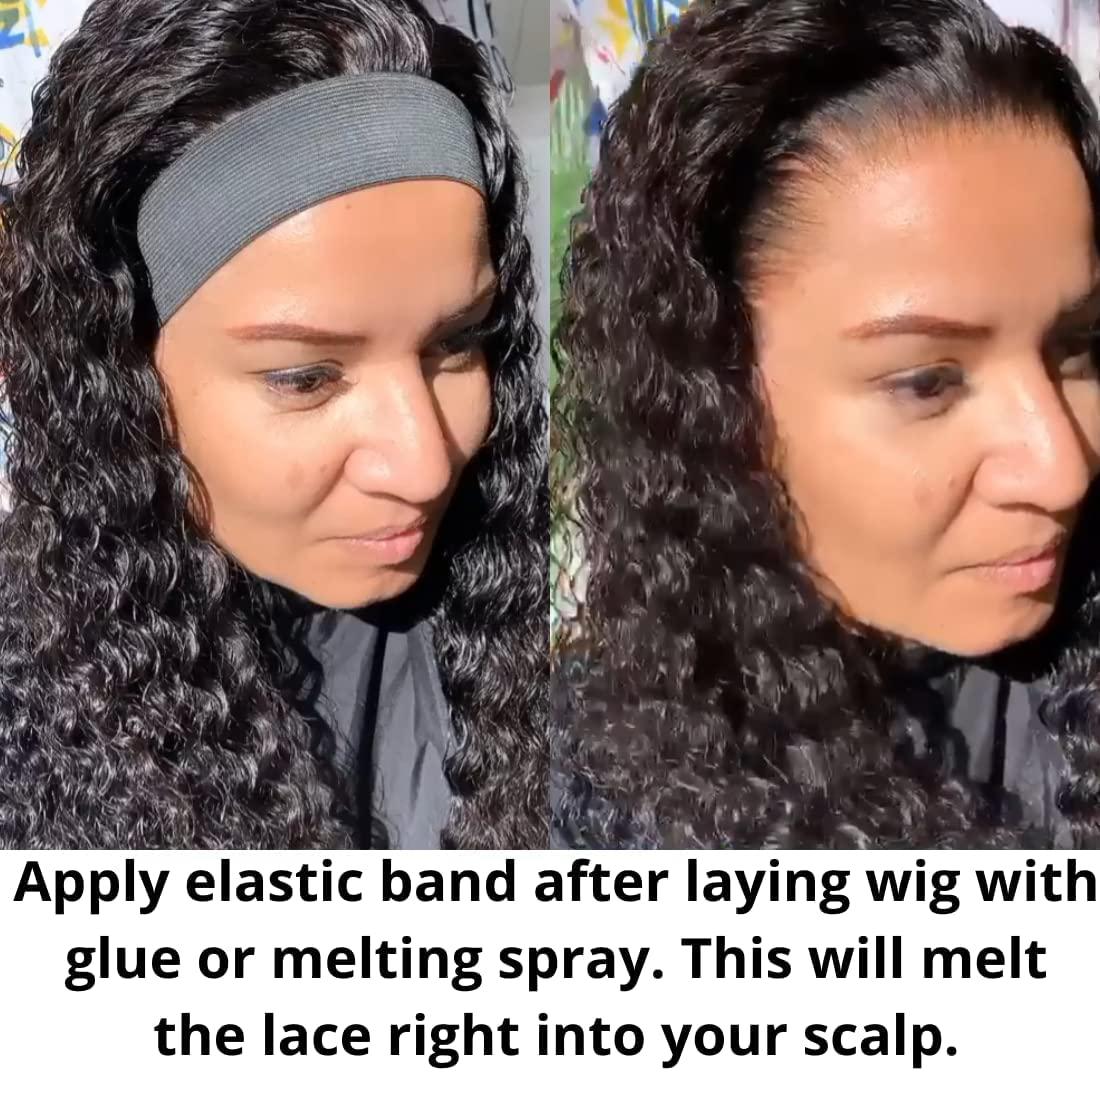 HOW TO SEW ELASTIC BAND TO YOUR WIG